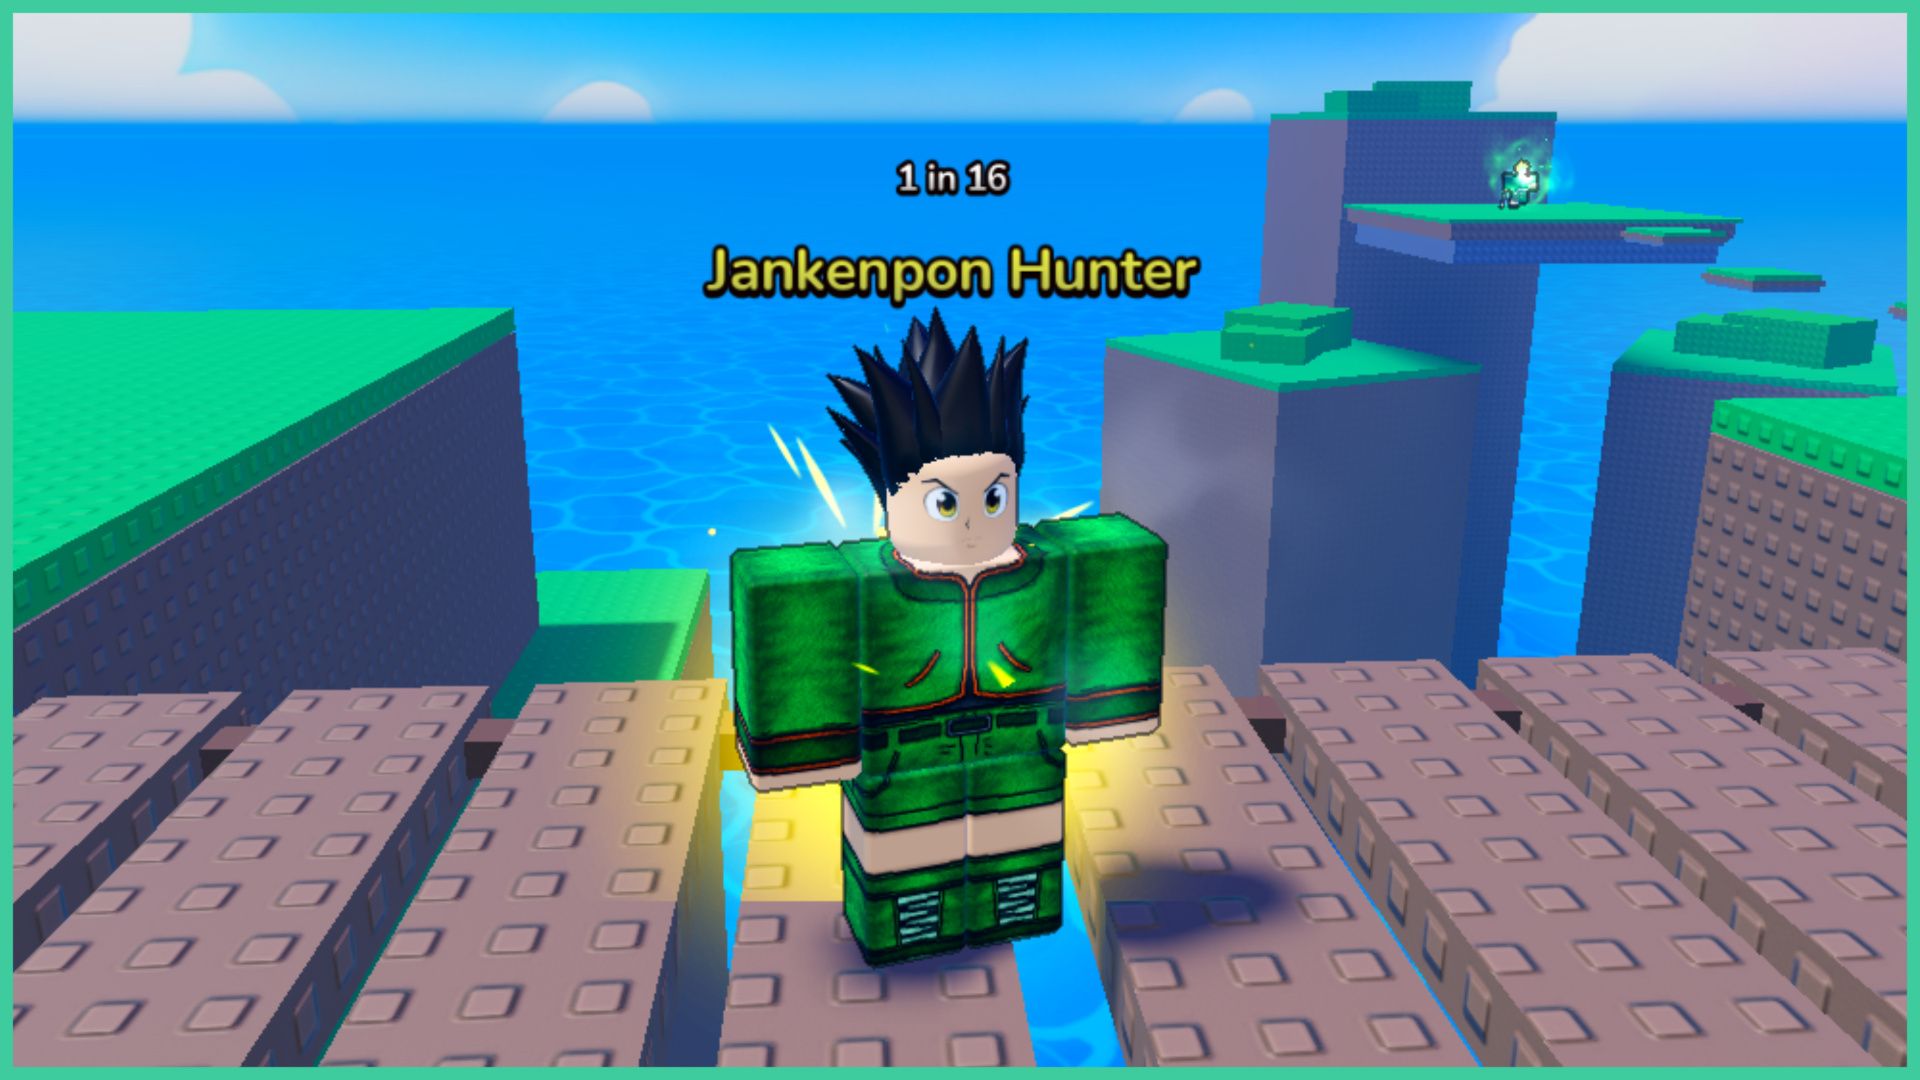 feature image for our anime rng characters guide, it is a screenshot of a roblox player dressed as gon from the hunter x hunter series, with the text 'jankenpon hunter, 1 in 16' above their head, they are standing on a wooden bridge between two grass hills, with the ocean in the background and wooden platforms that act as an obstacle course